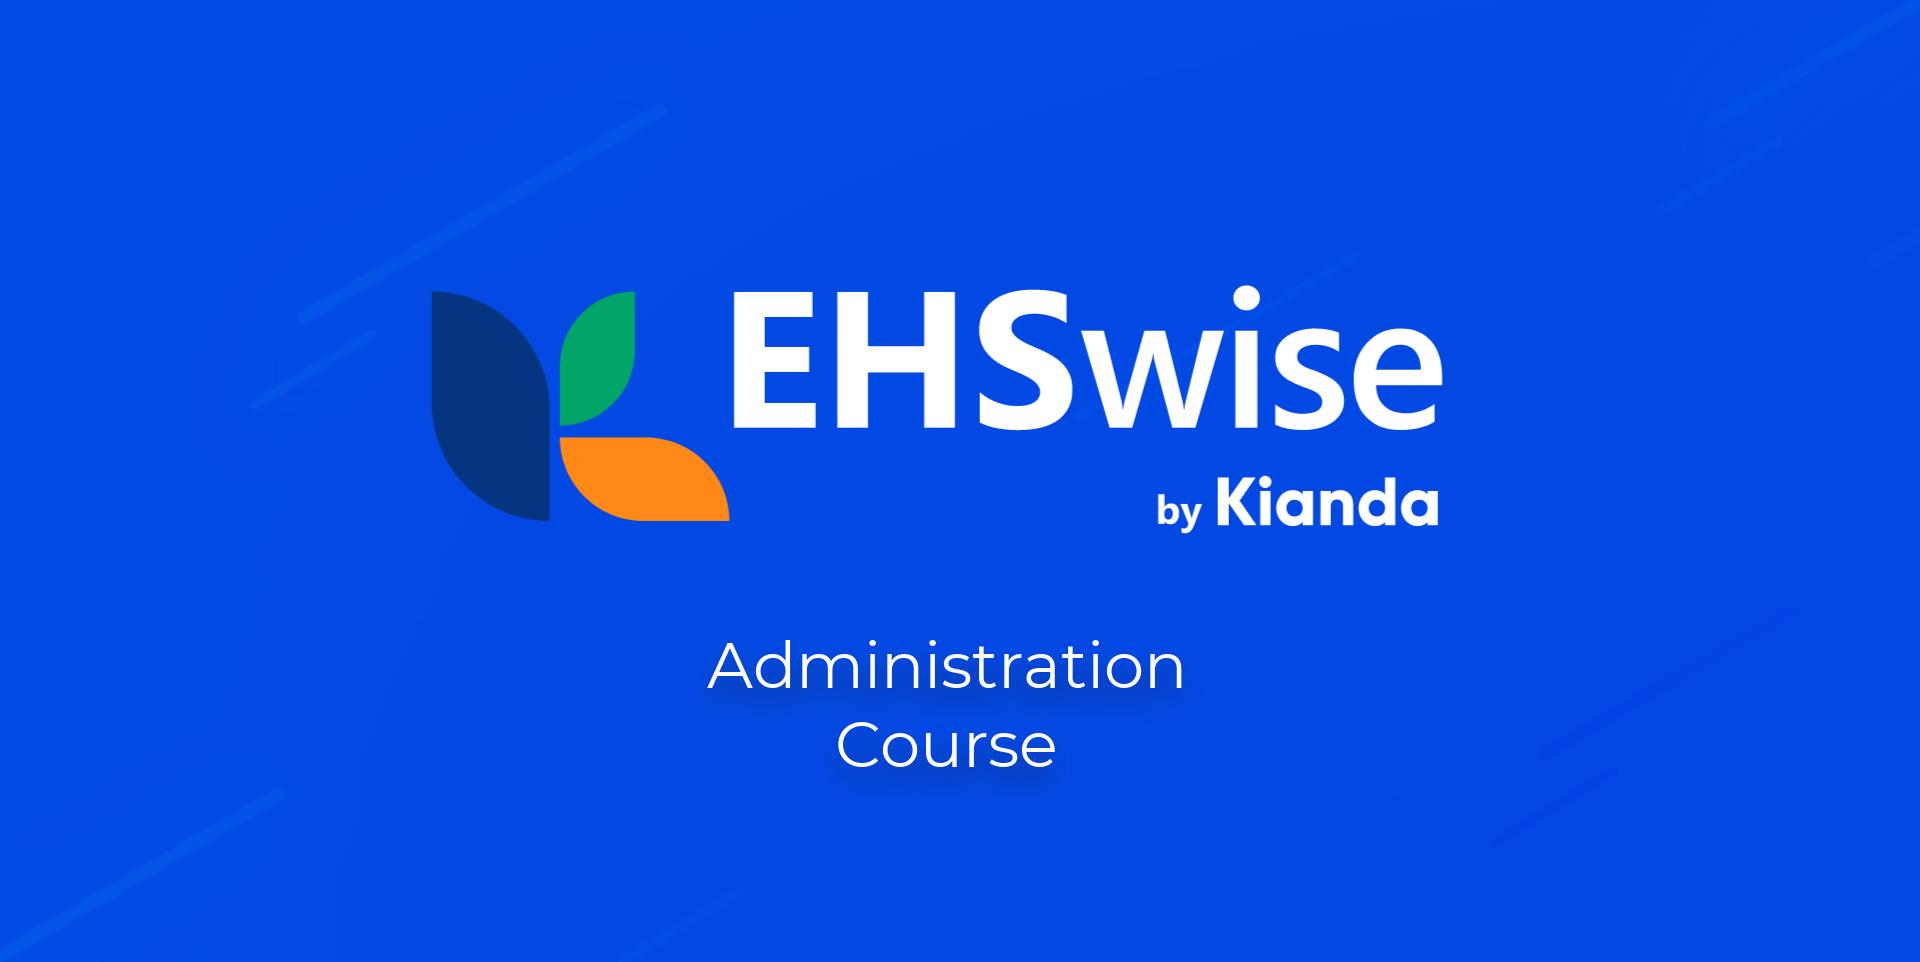 EHSwise Administrator